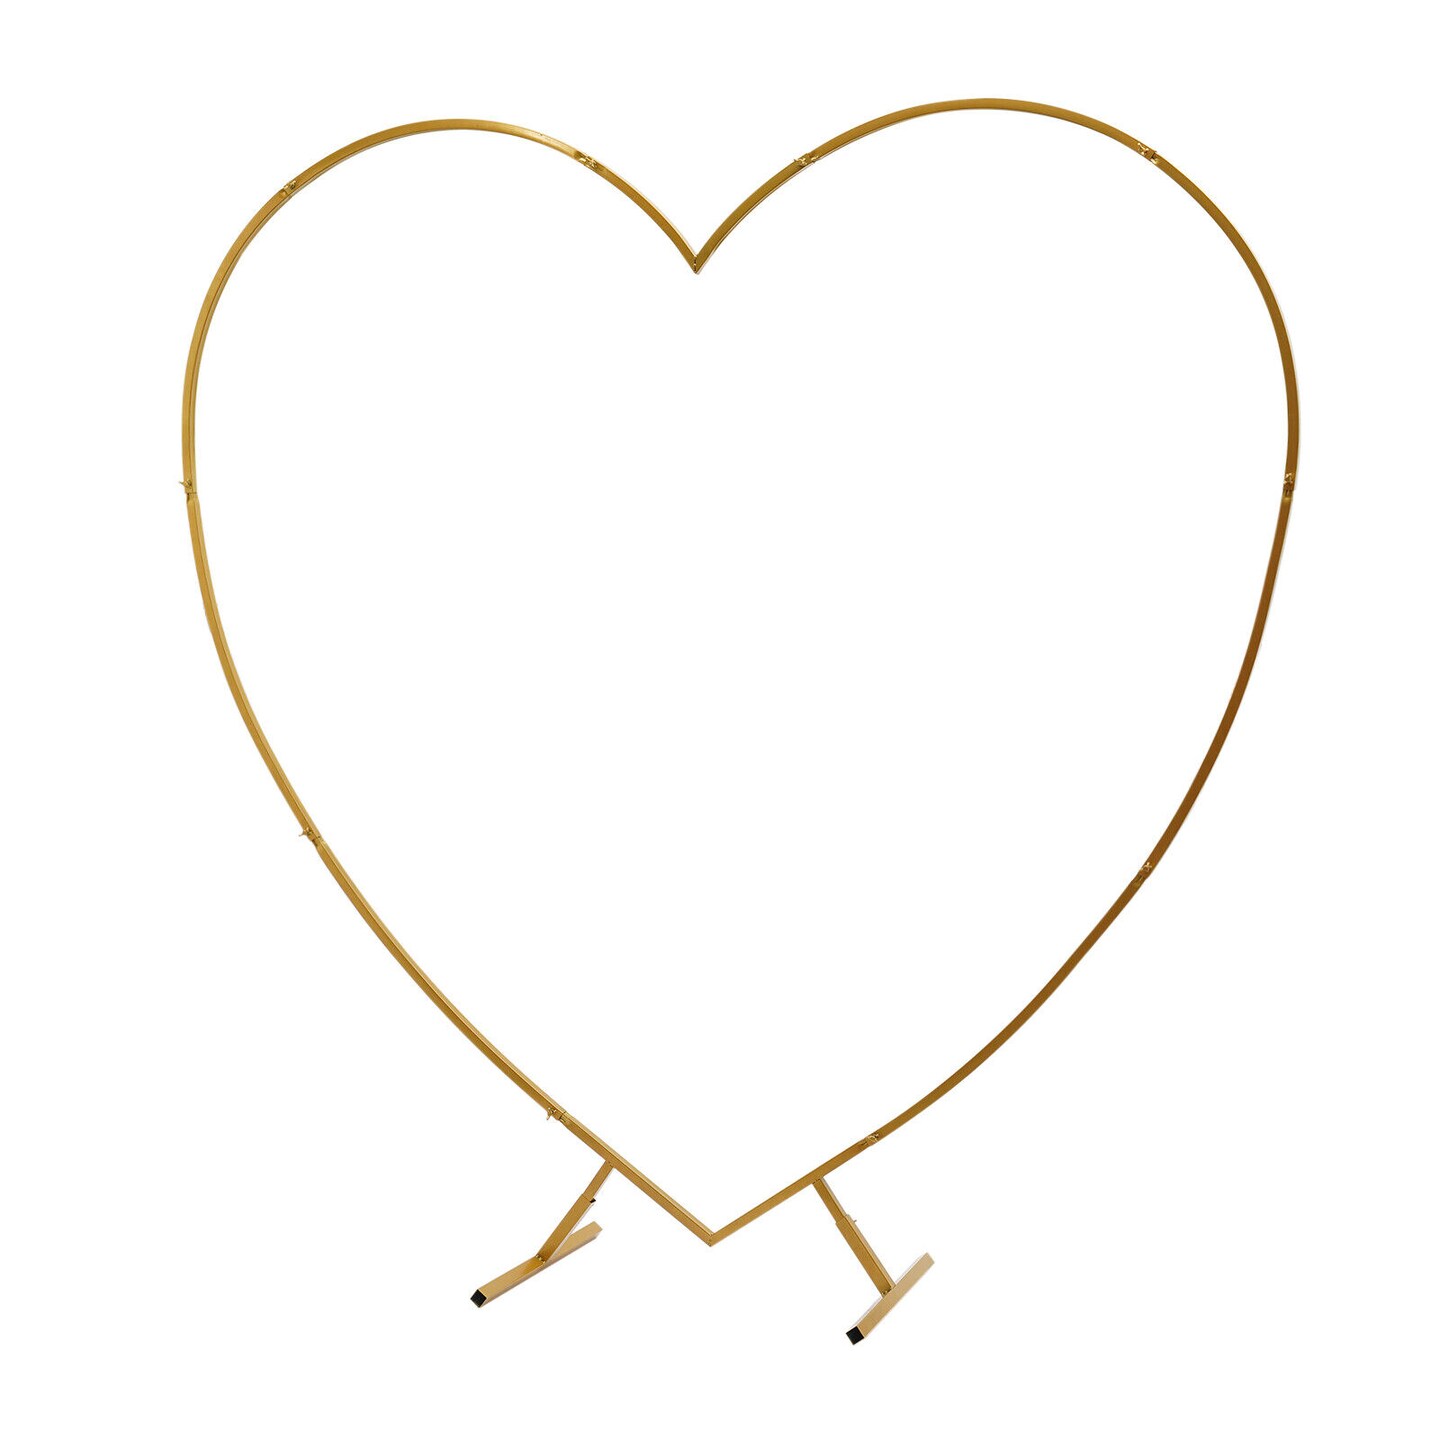 Kitcheniva Heart Shaped Gold Metal Balloon Arch Stand